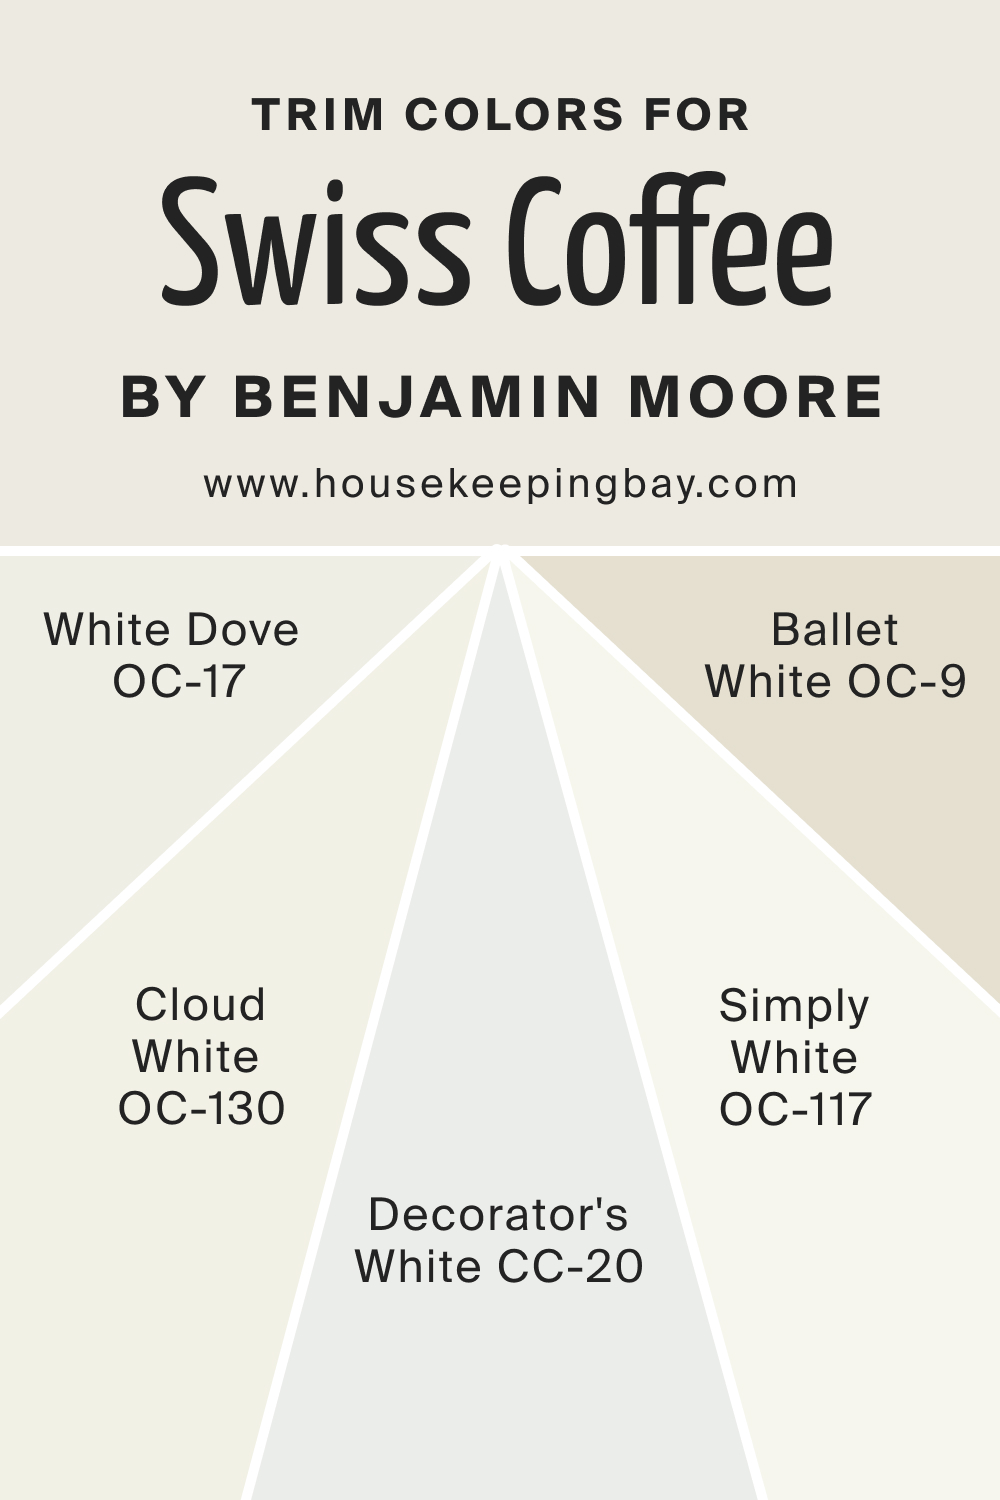 What Is the Best Trim Color For BM Swiss Coffee